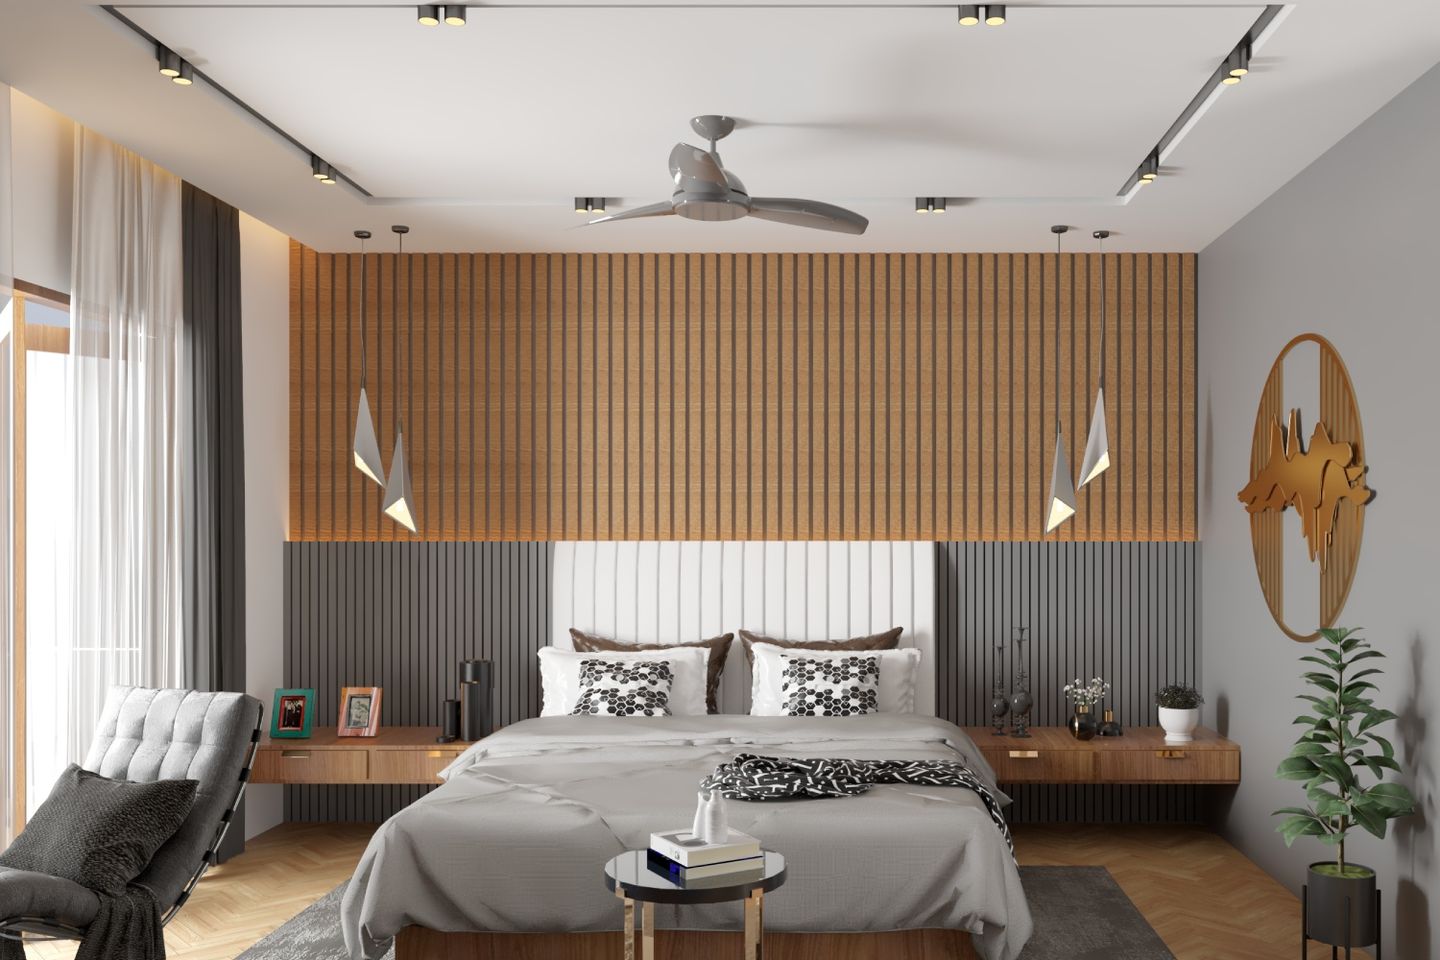 Bedroom False Ceiling With A Painted Finish - Livspace